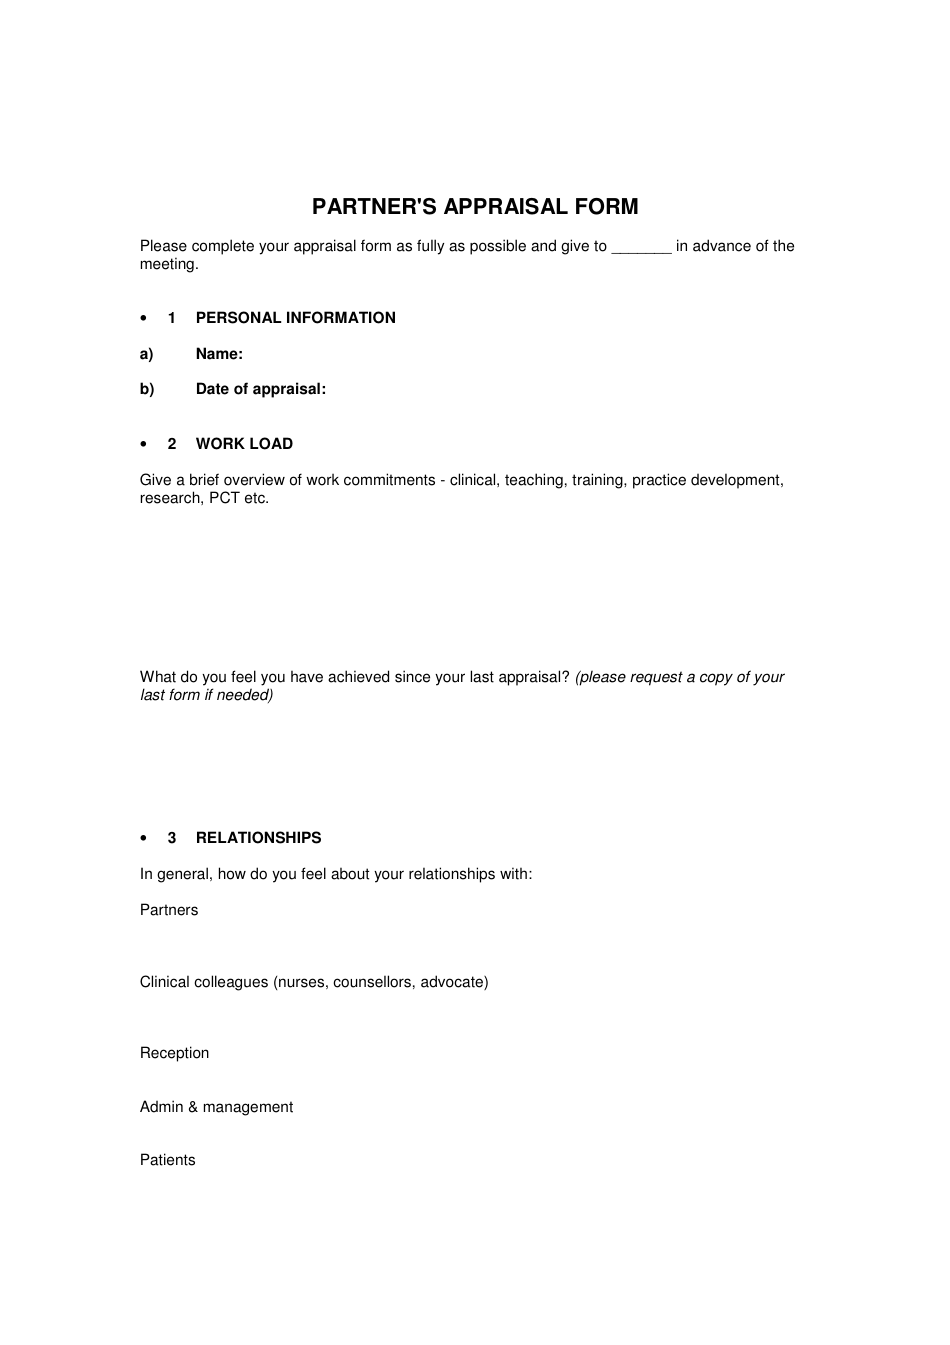 Partners Appraisal Form - Equip, Page 1